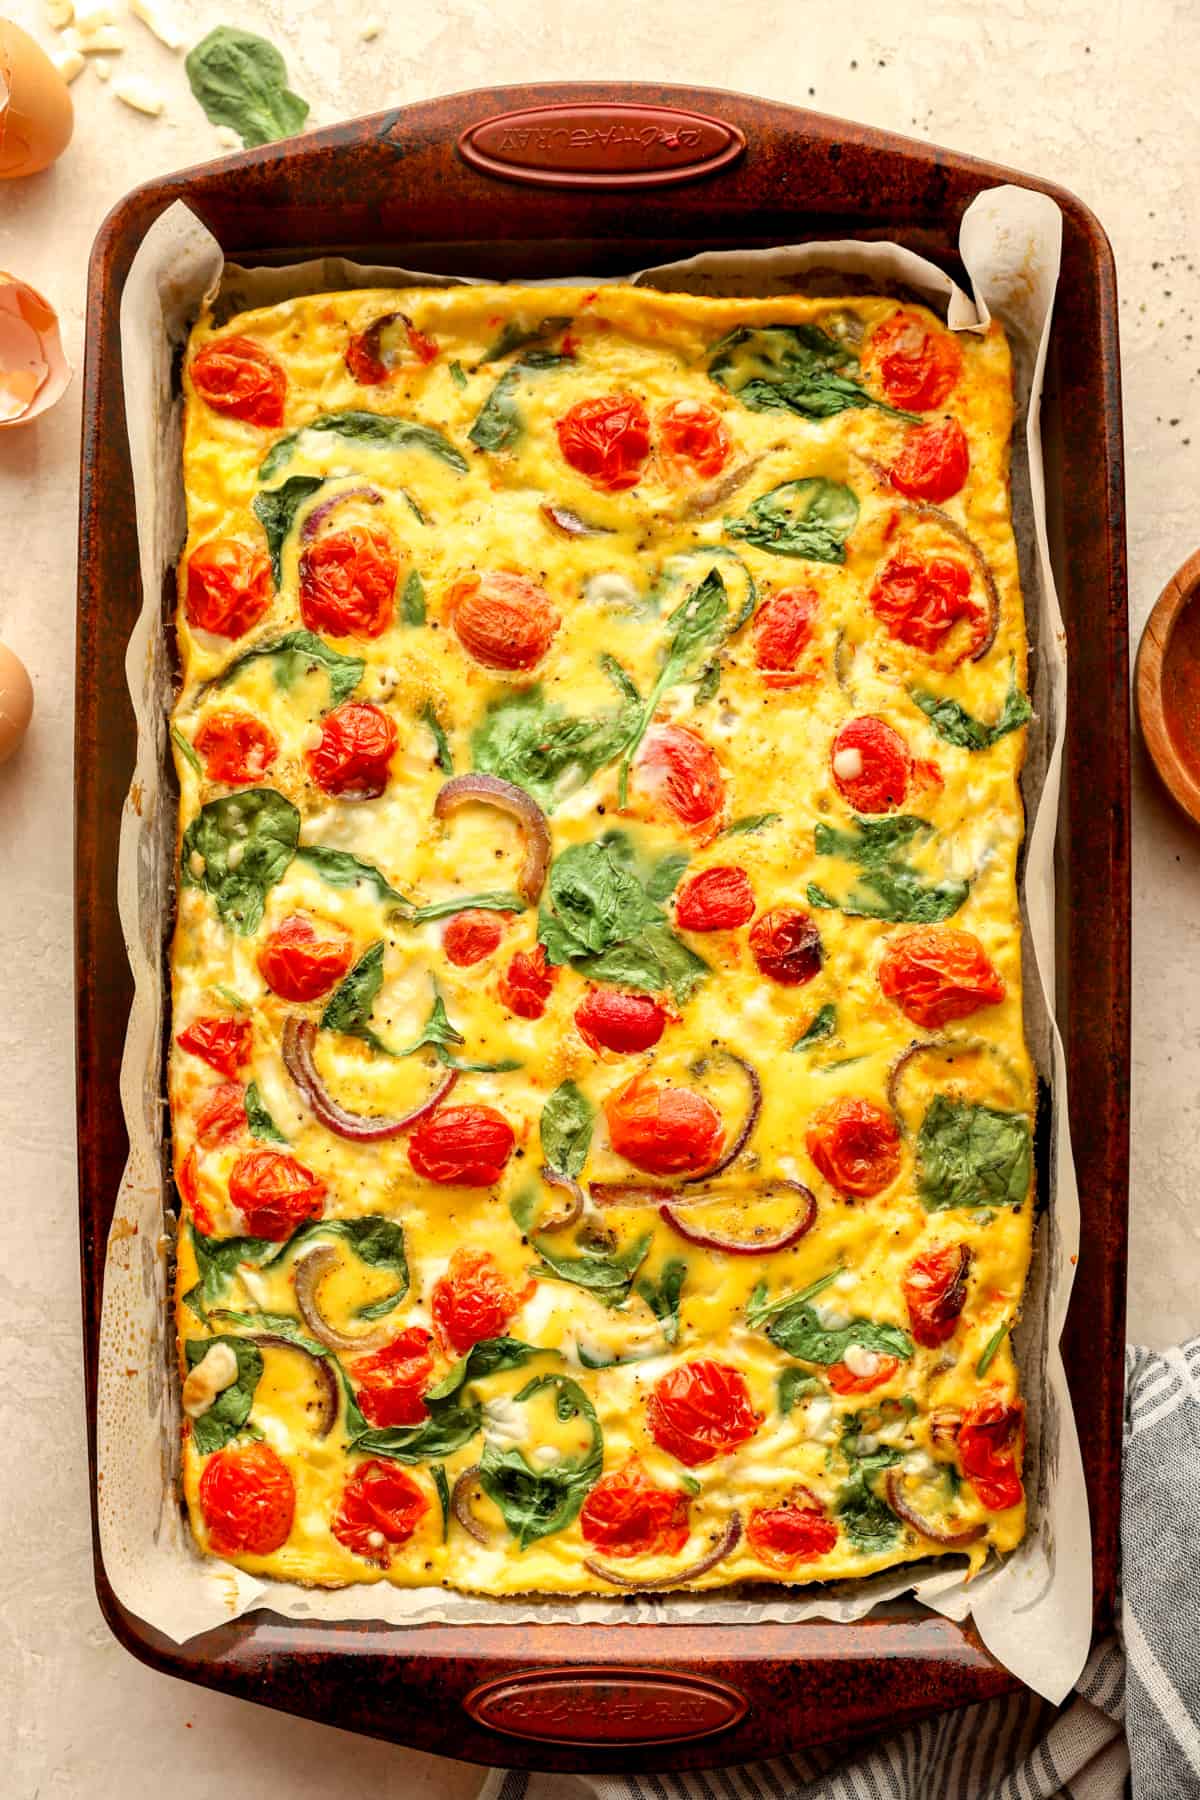 Finished Baked Sheet Pan Eggs with Spinach and Tomatoes.